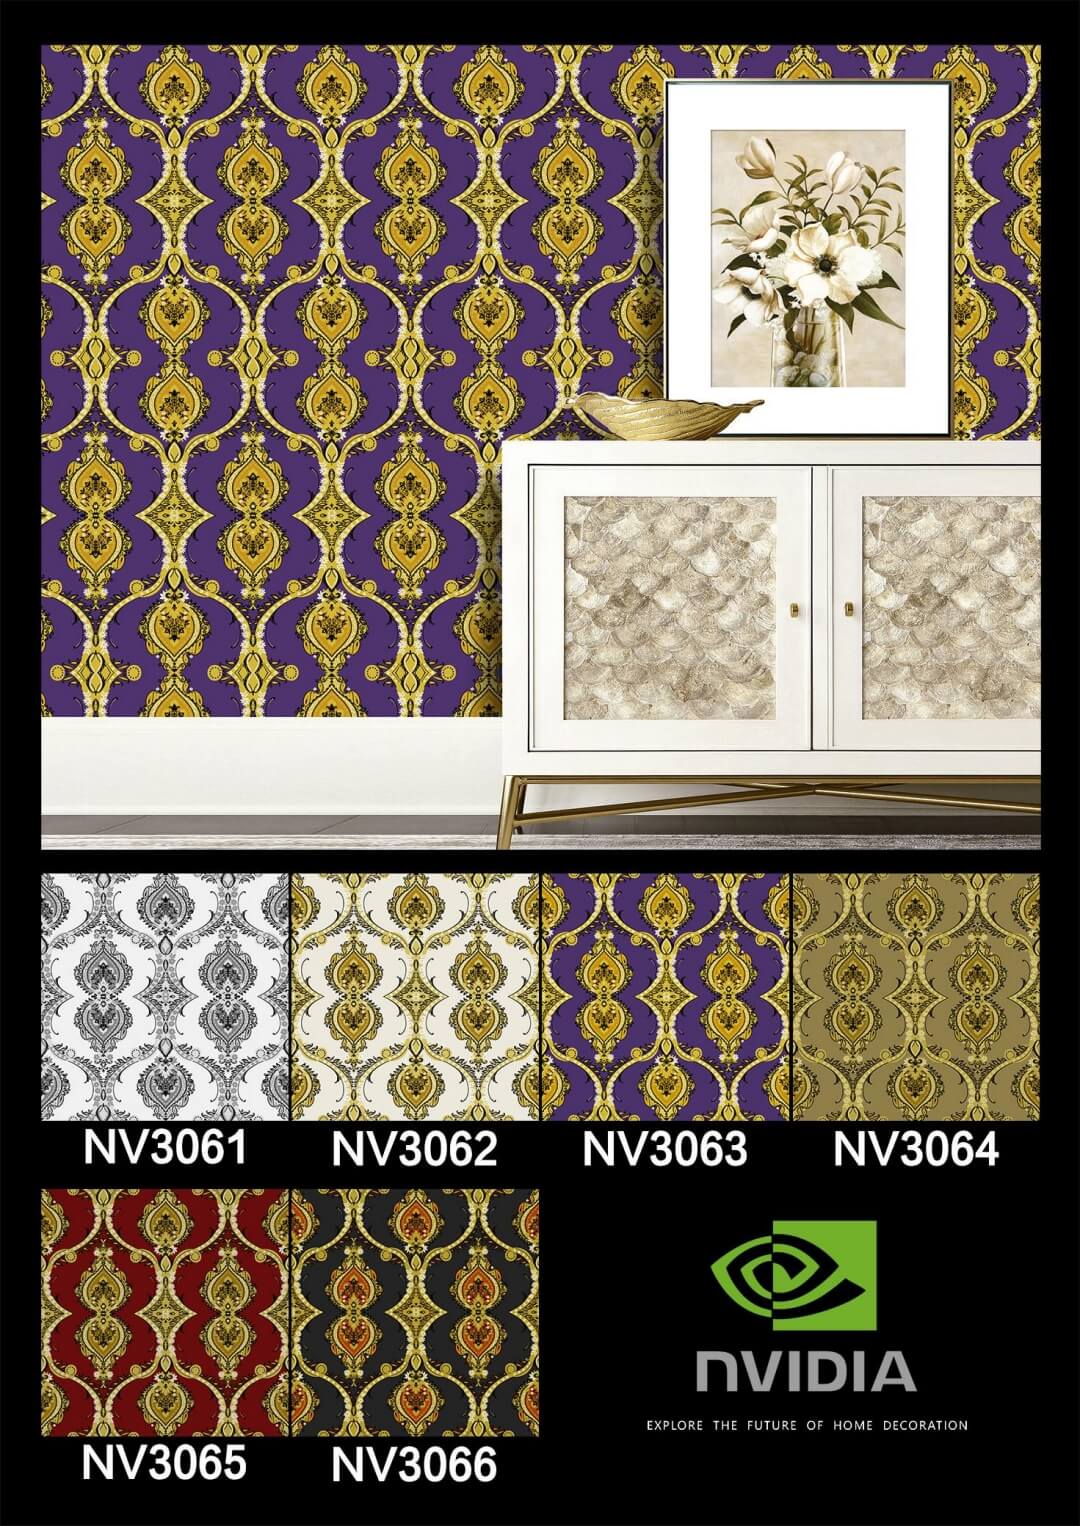 3D Waterproof Home Wallpaper at Lowest Price (7)